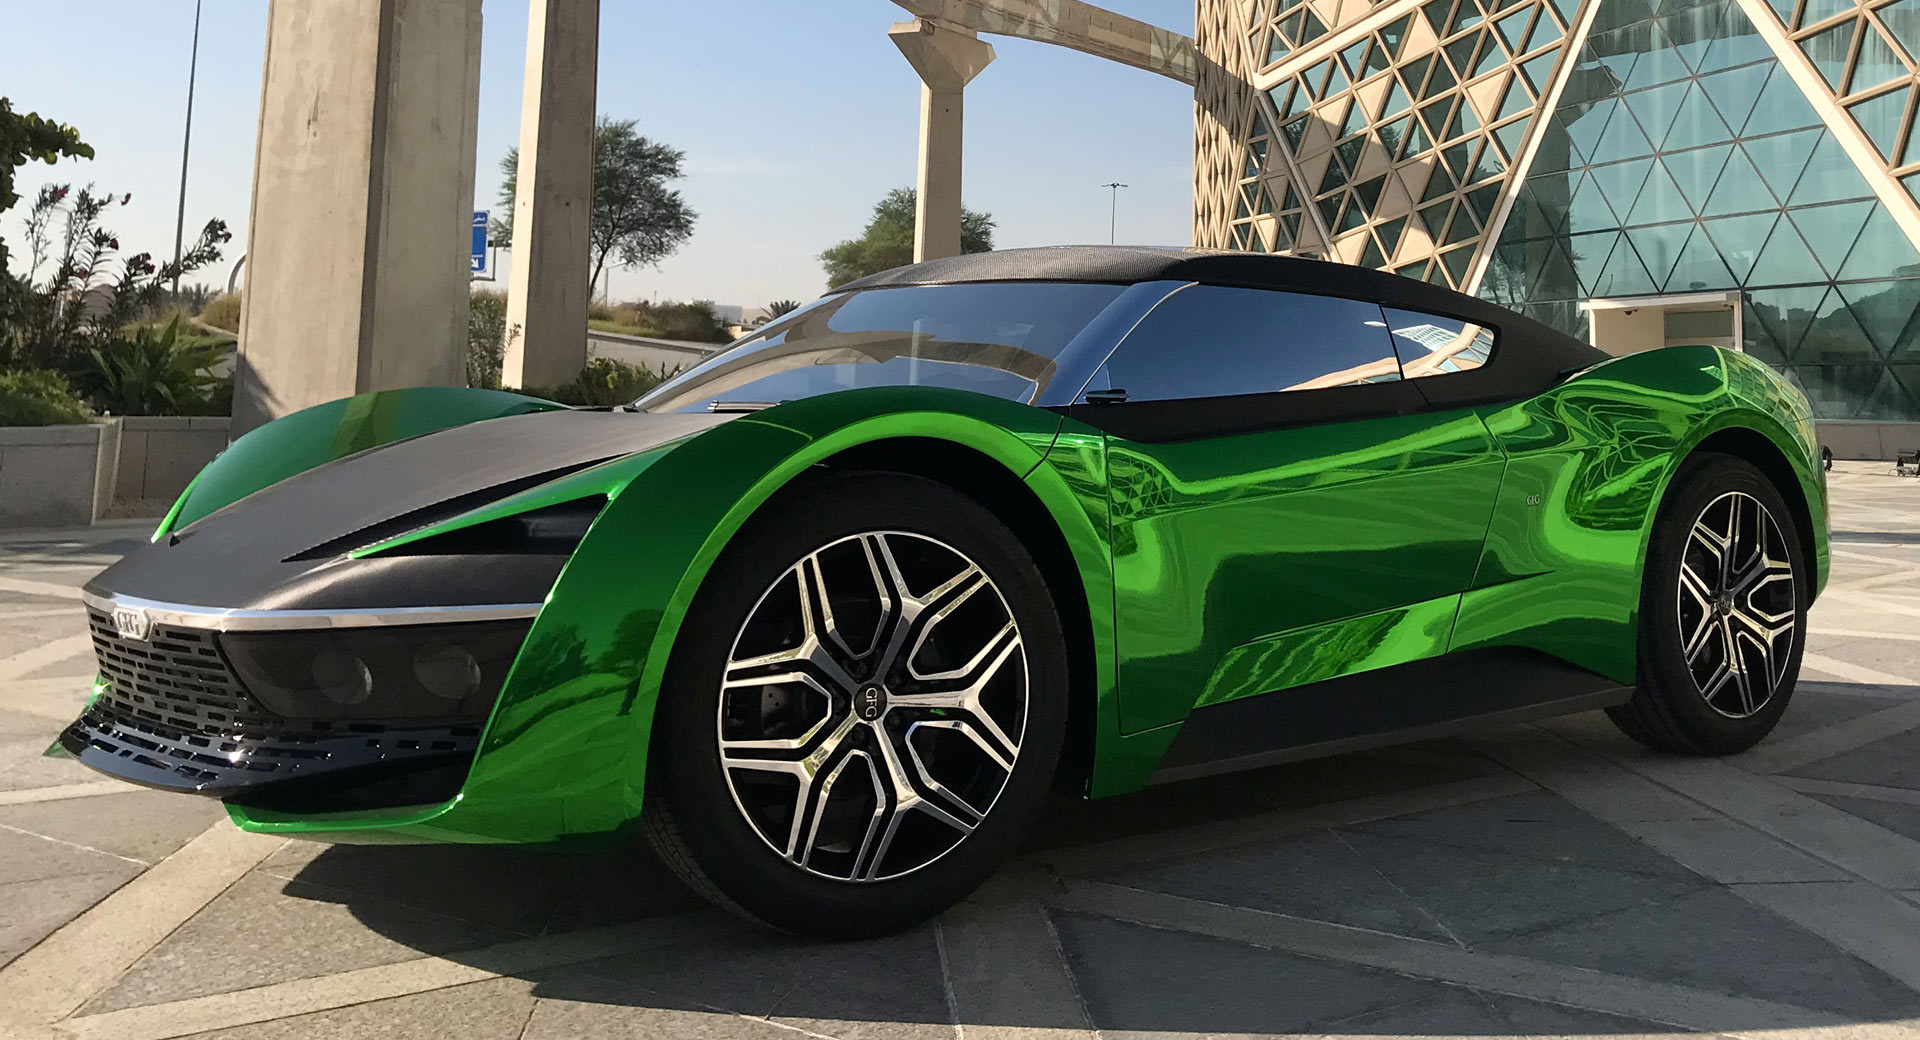 The GFG Style 2030 Concept Is An Electric AllWheel Drive Sports Car